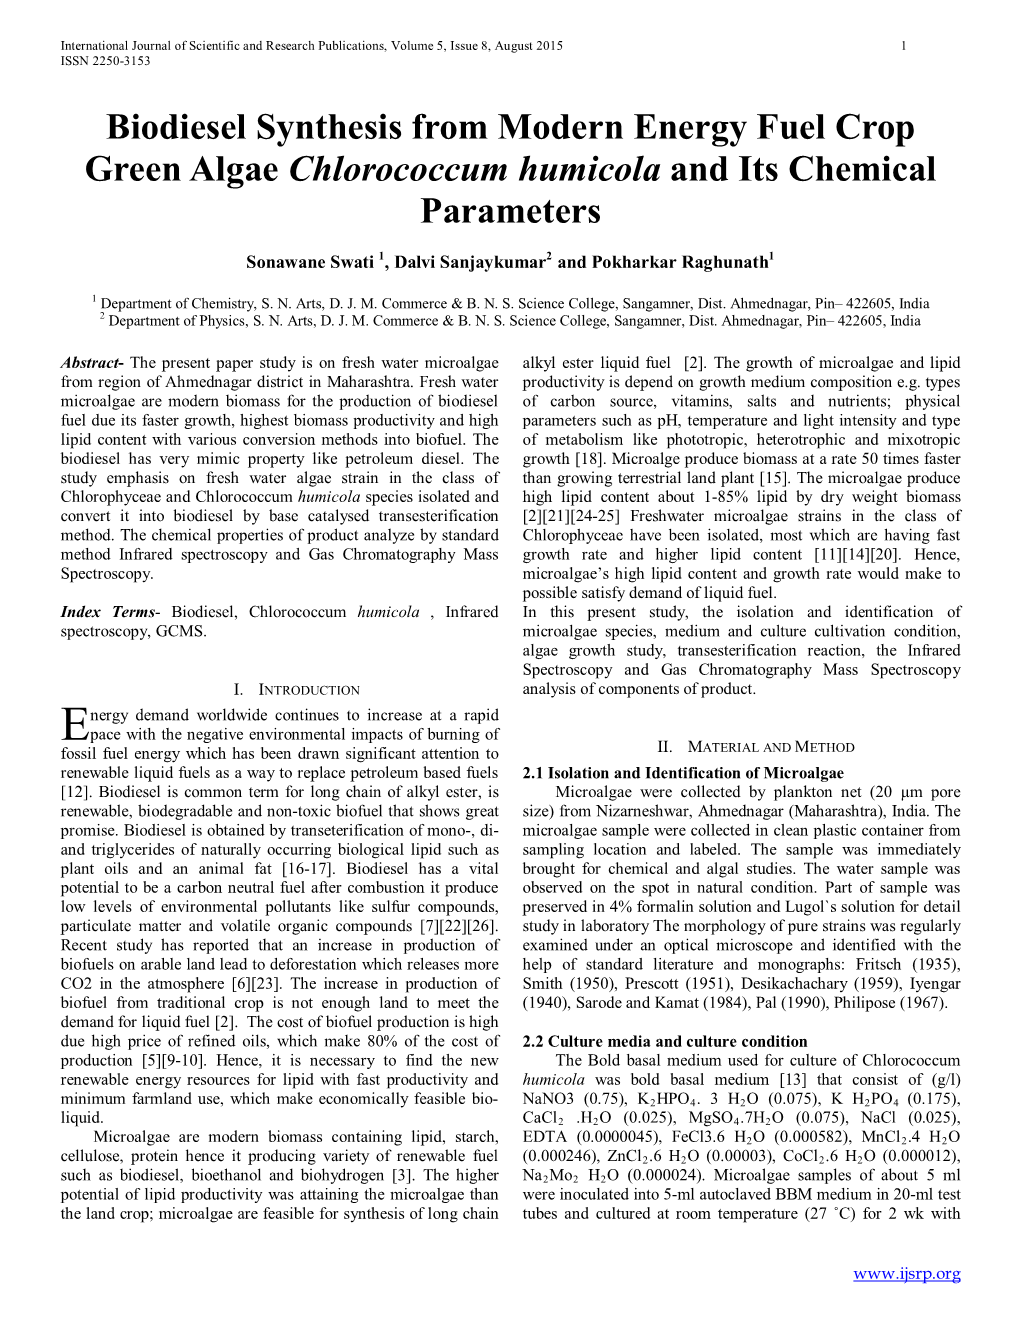 Biodiesel Synthesis from Modern Energy Fuel Crop Green Algae Chlorococcum Humicola and Its Chemical Parameters